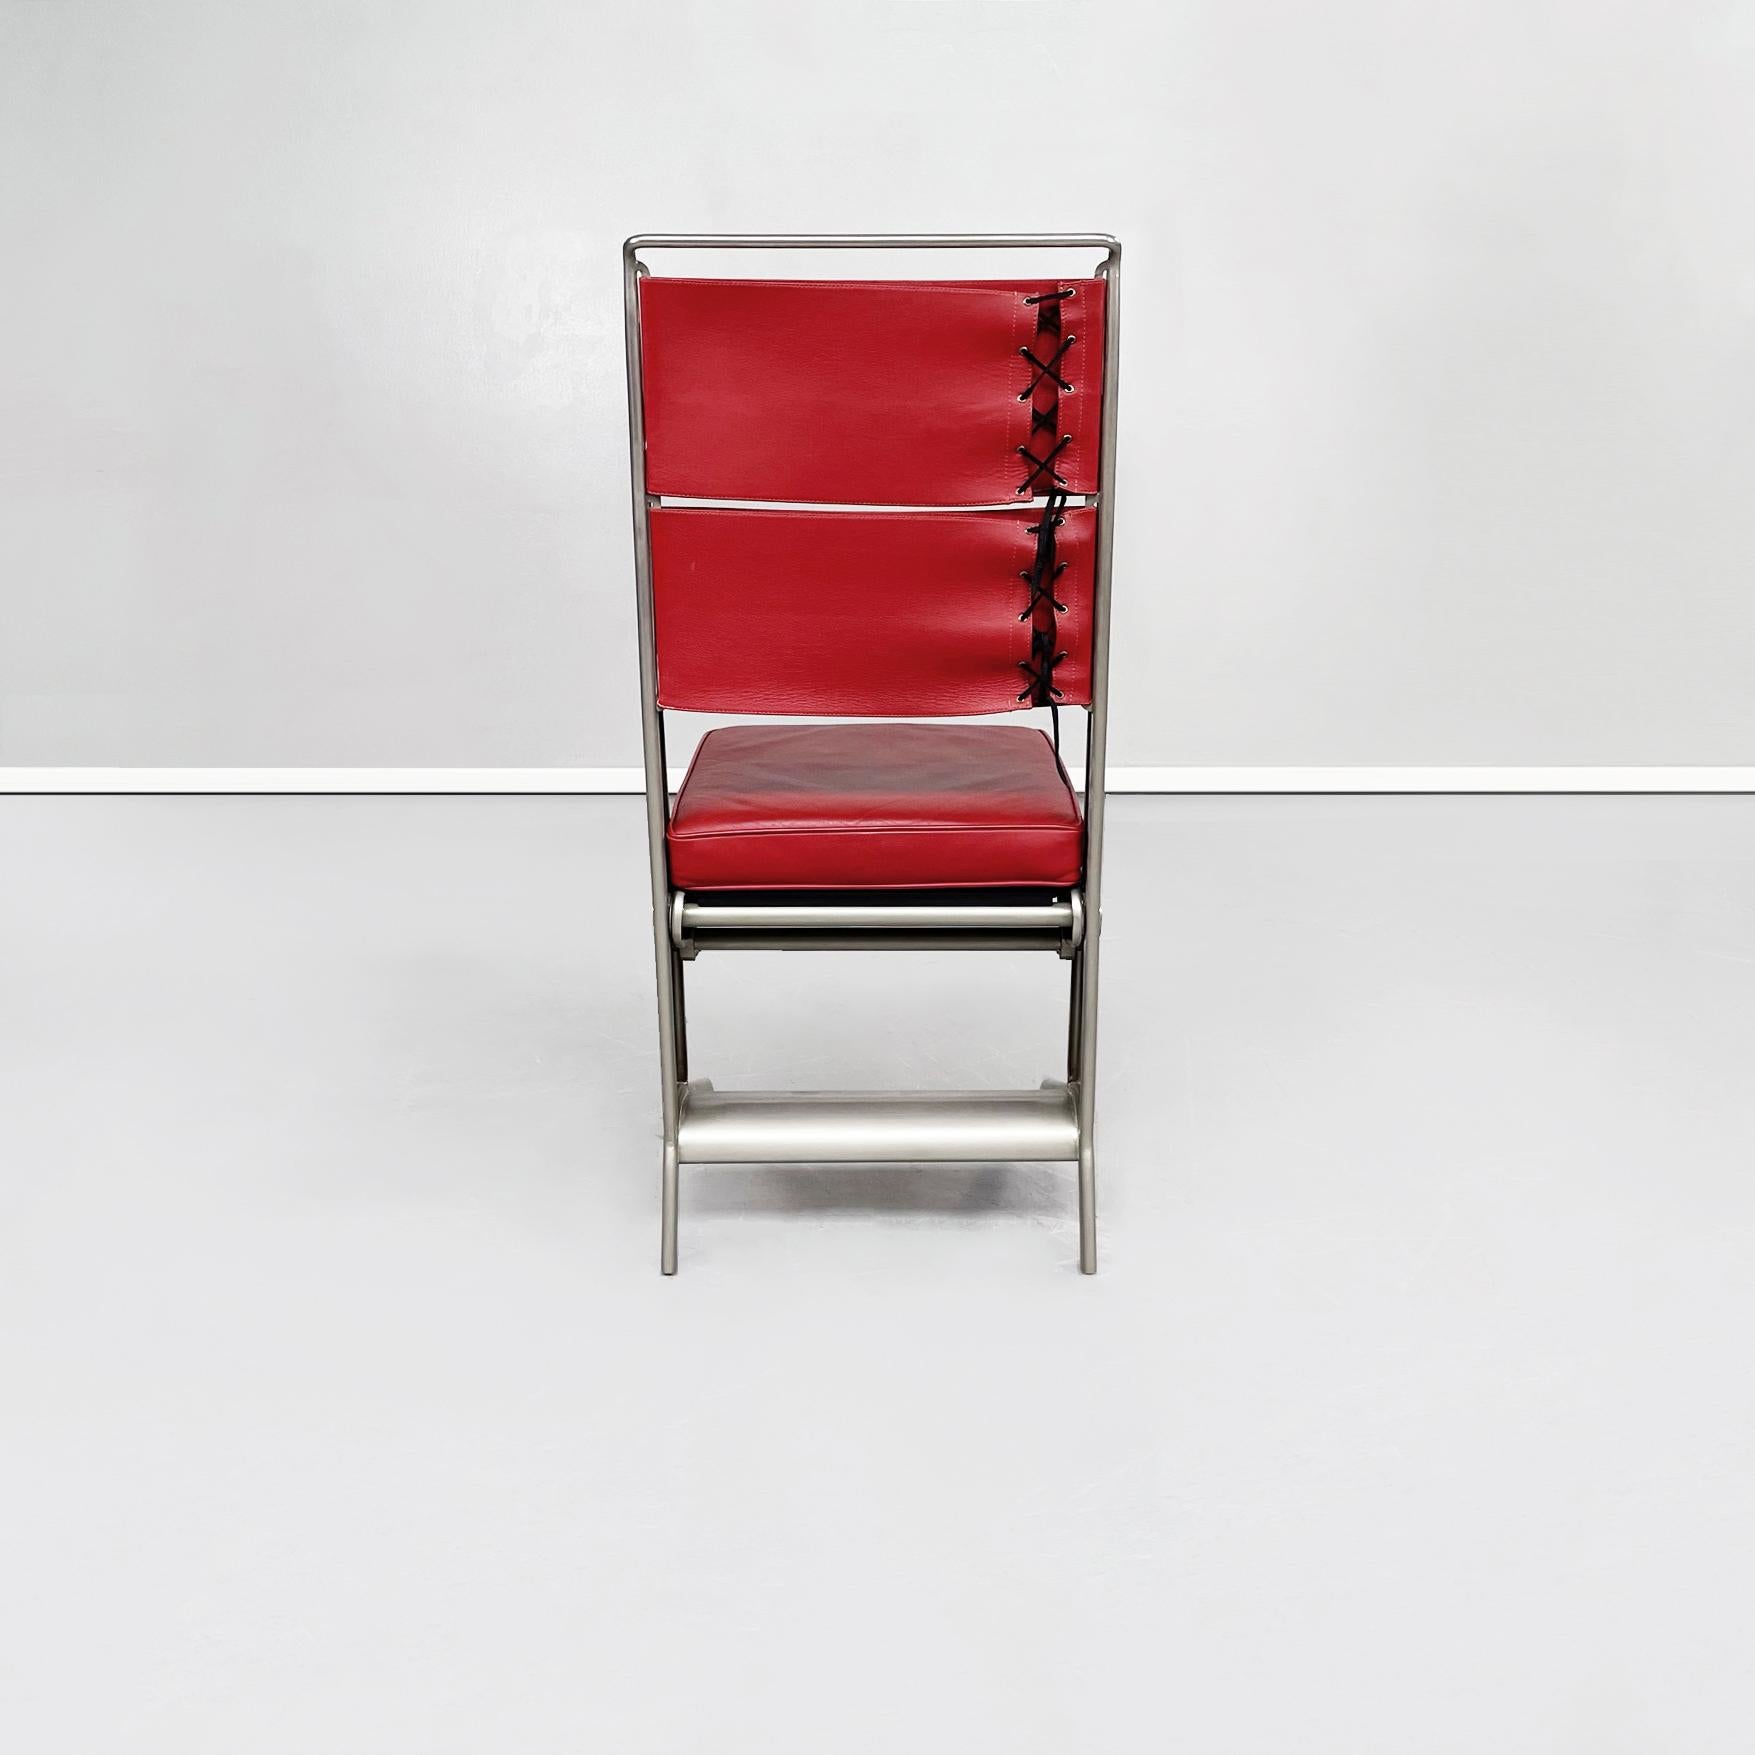 Late 20th Century French Mid-Century Red Leather and Steel Chair by Jean Prouvé for Tecta, 1980s For Sale